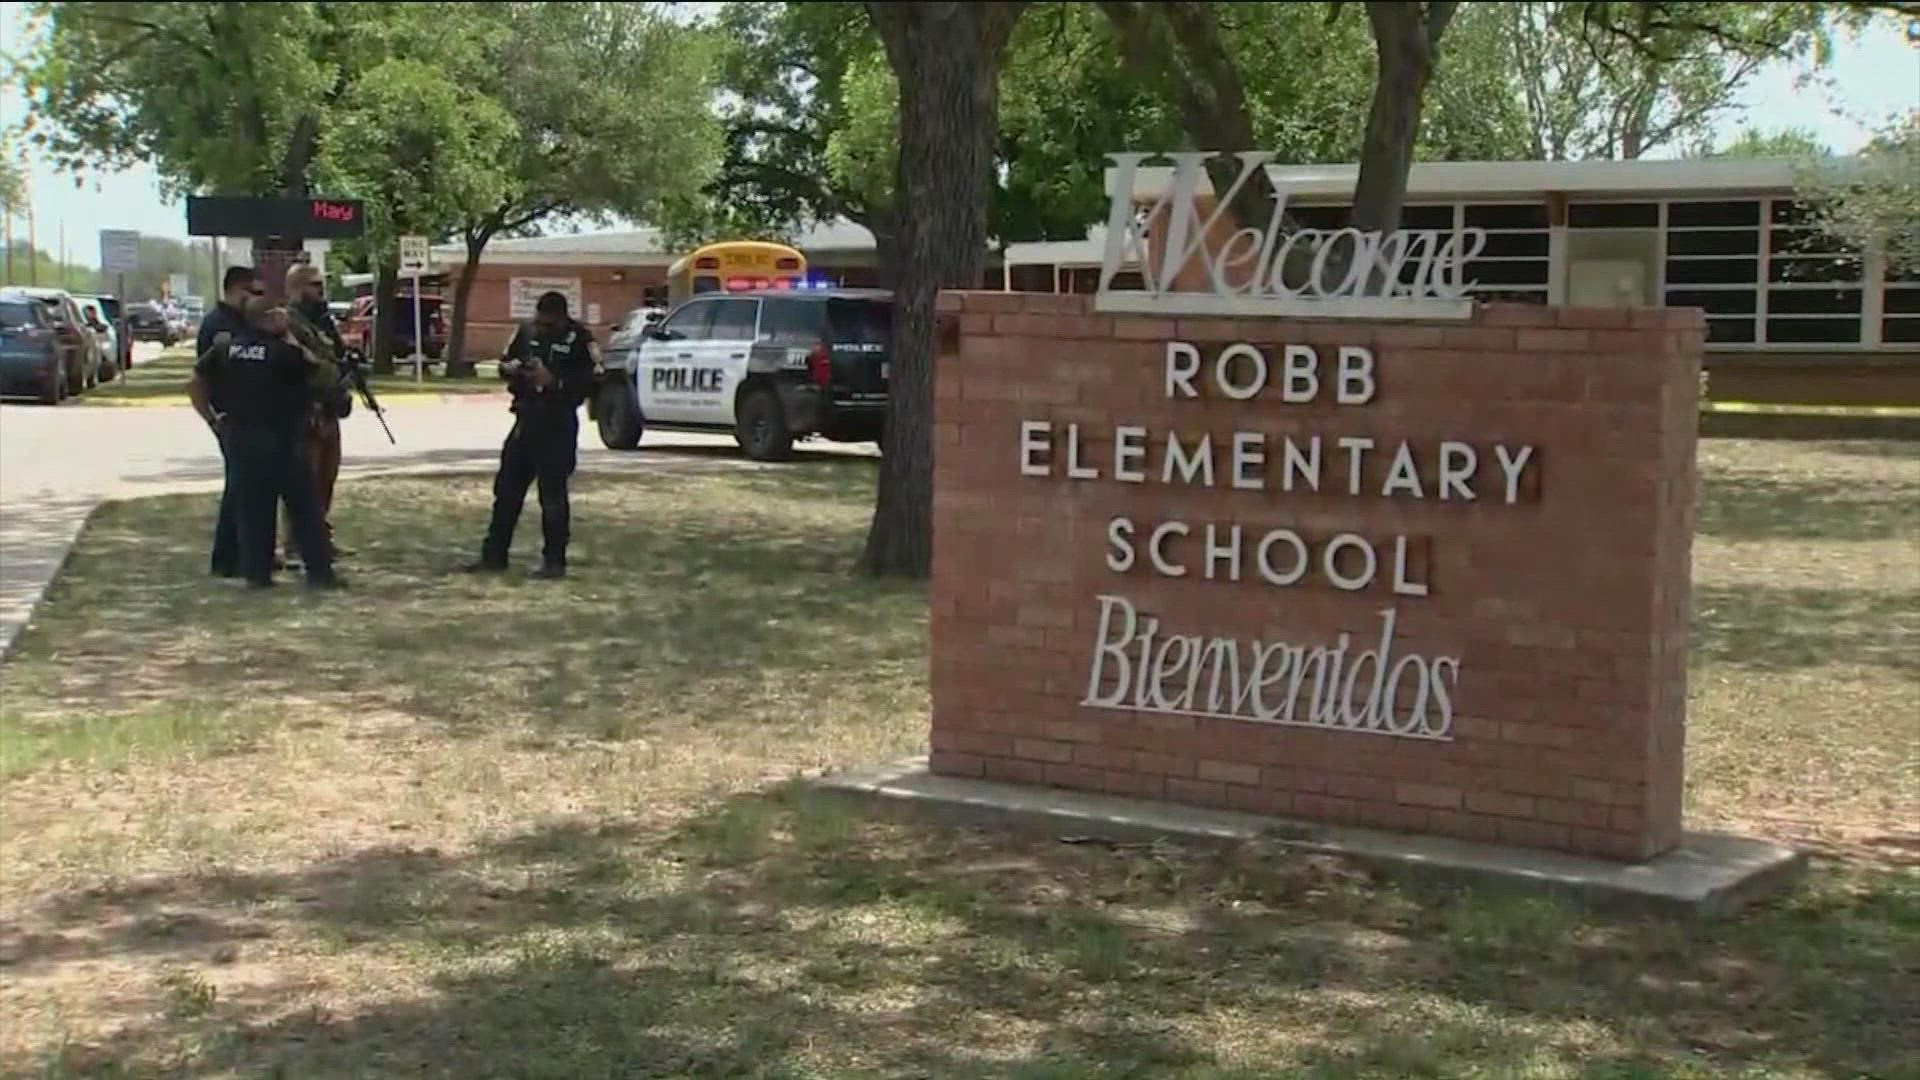 The mayor claims no Uvalde PD officer actually saw the shooter prior to him entering the school and that the person spotted outside was actually a coach.